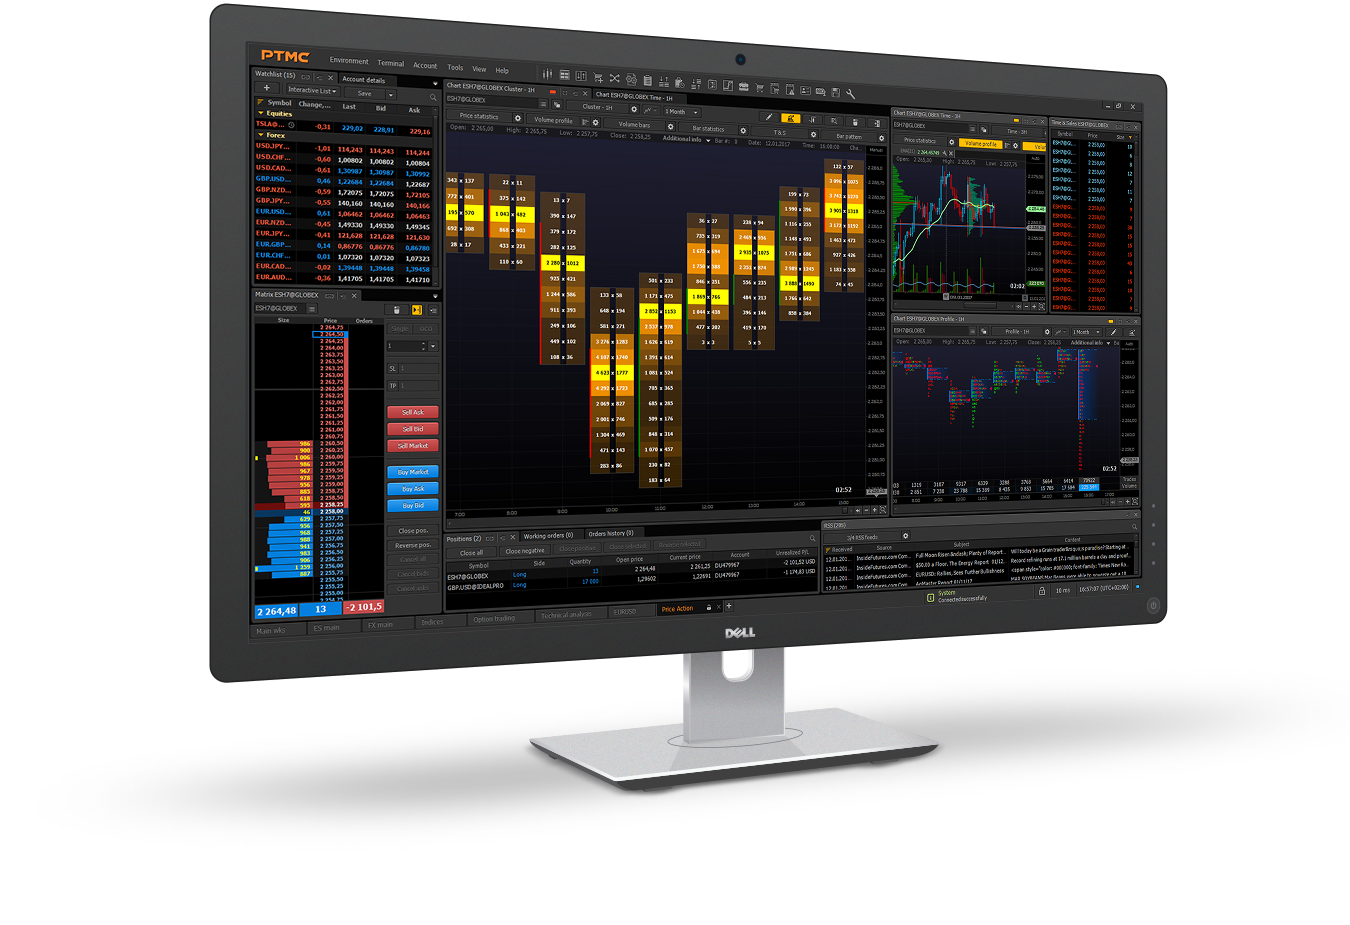 PTMC trading software for Futures and Stocks